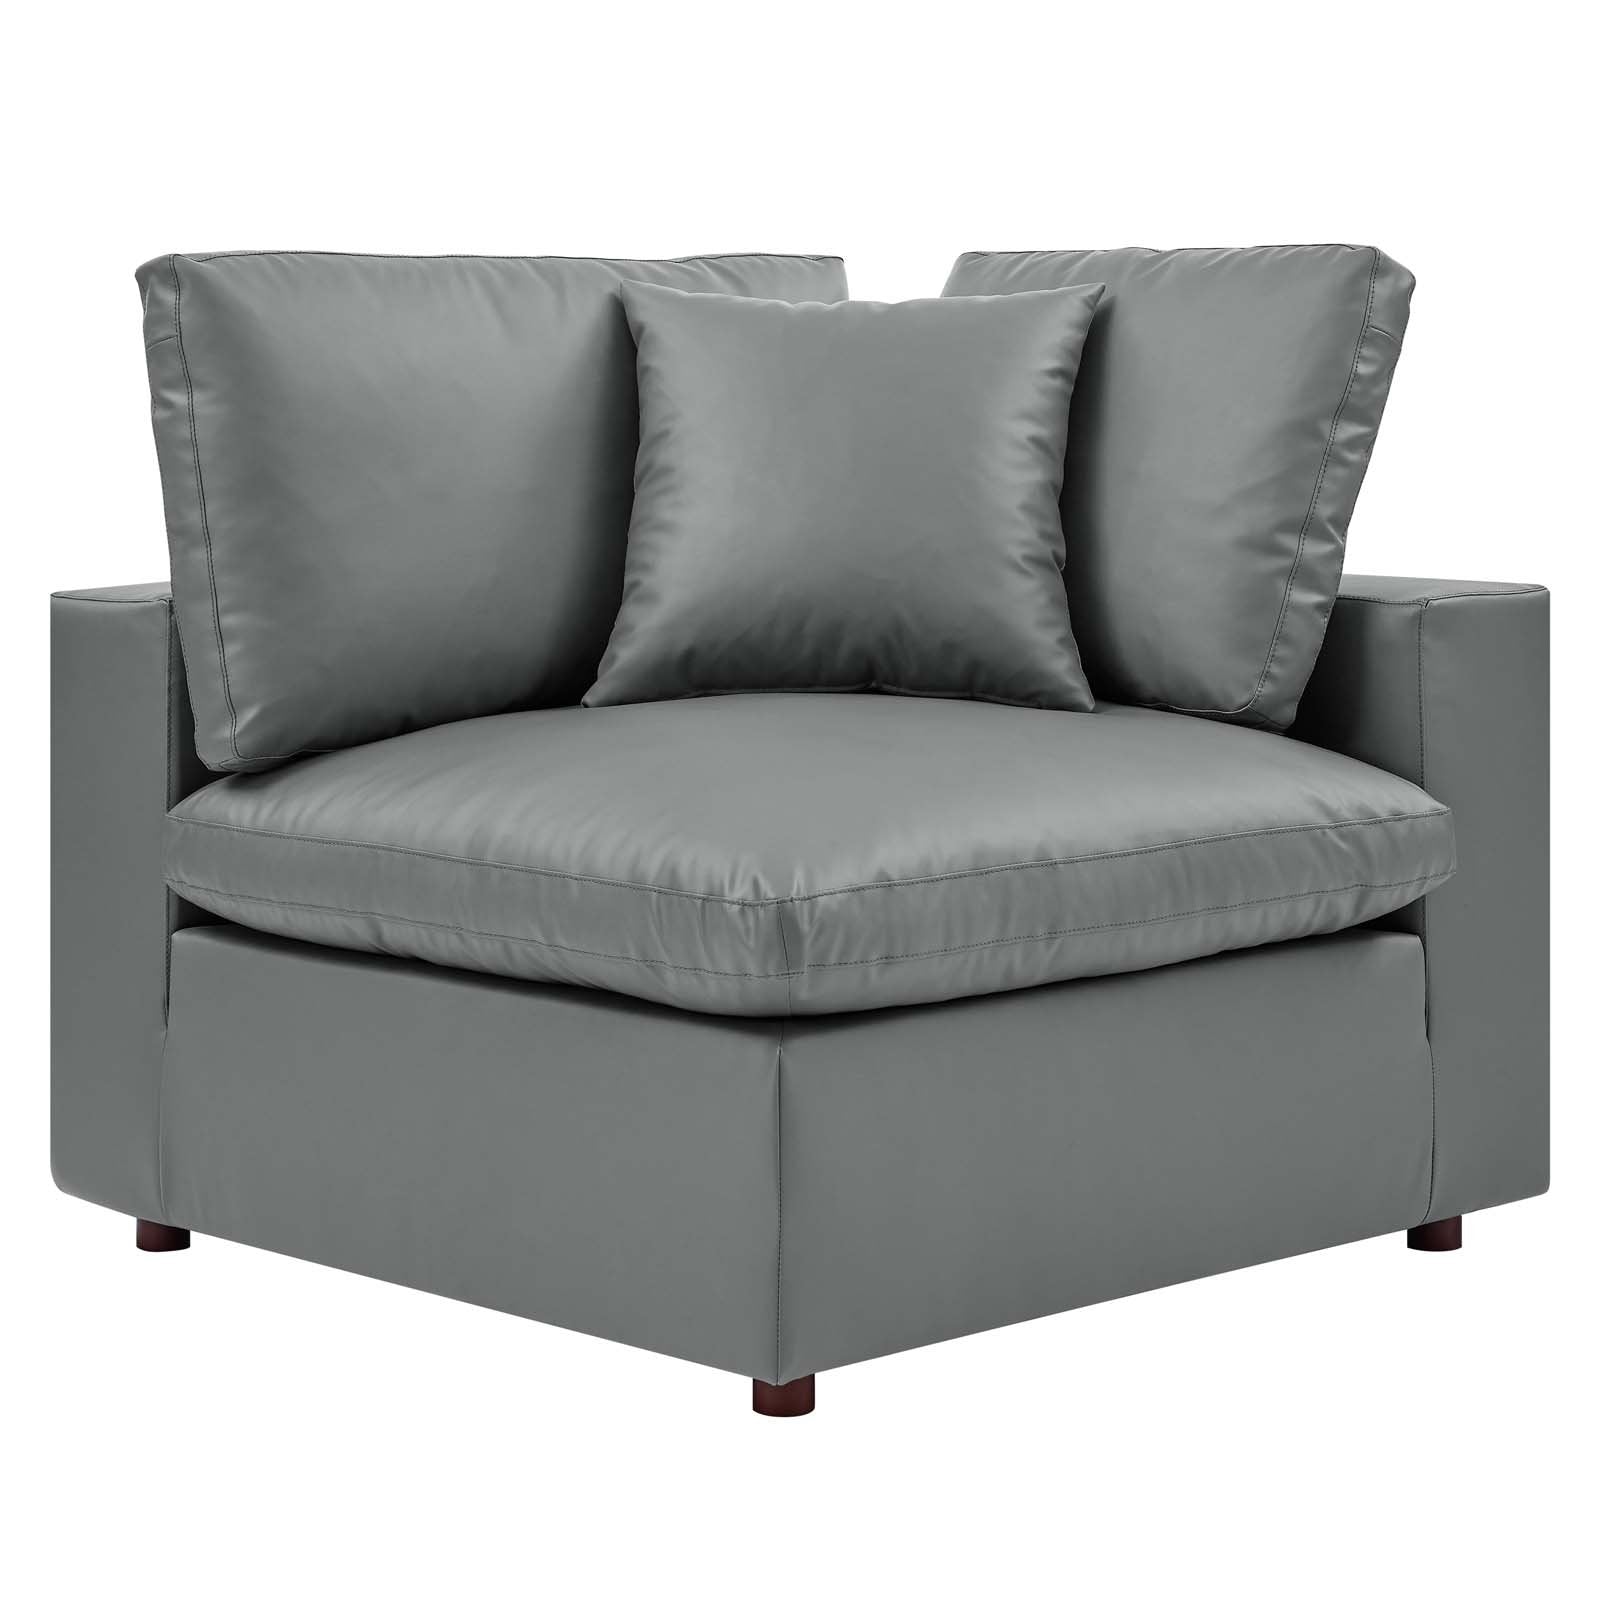 Commix Down Filled Overstuffed Vegan Leather Corner Chair - East Shore Modern Home Furnishings